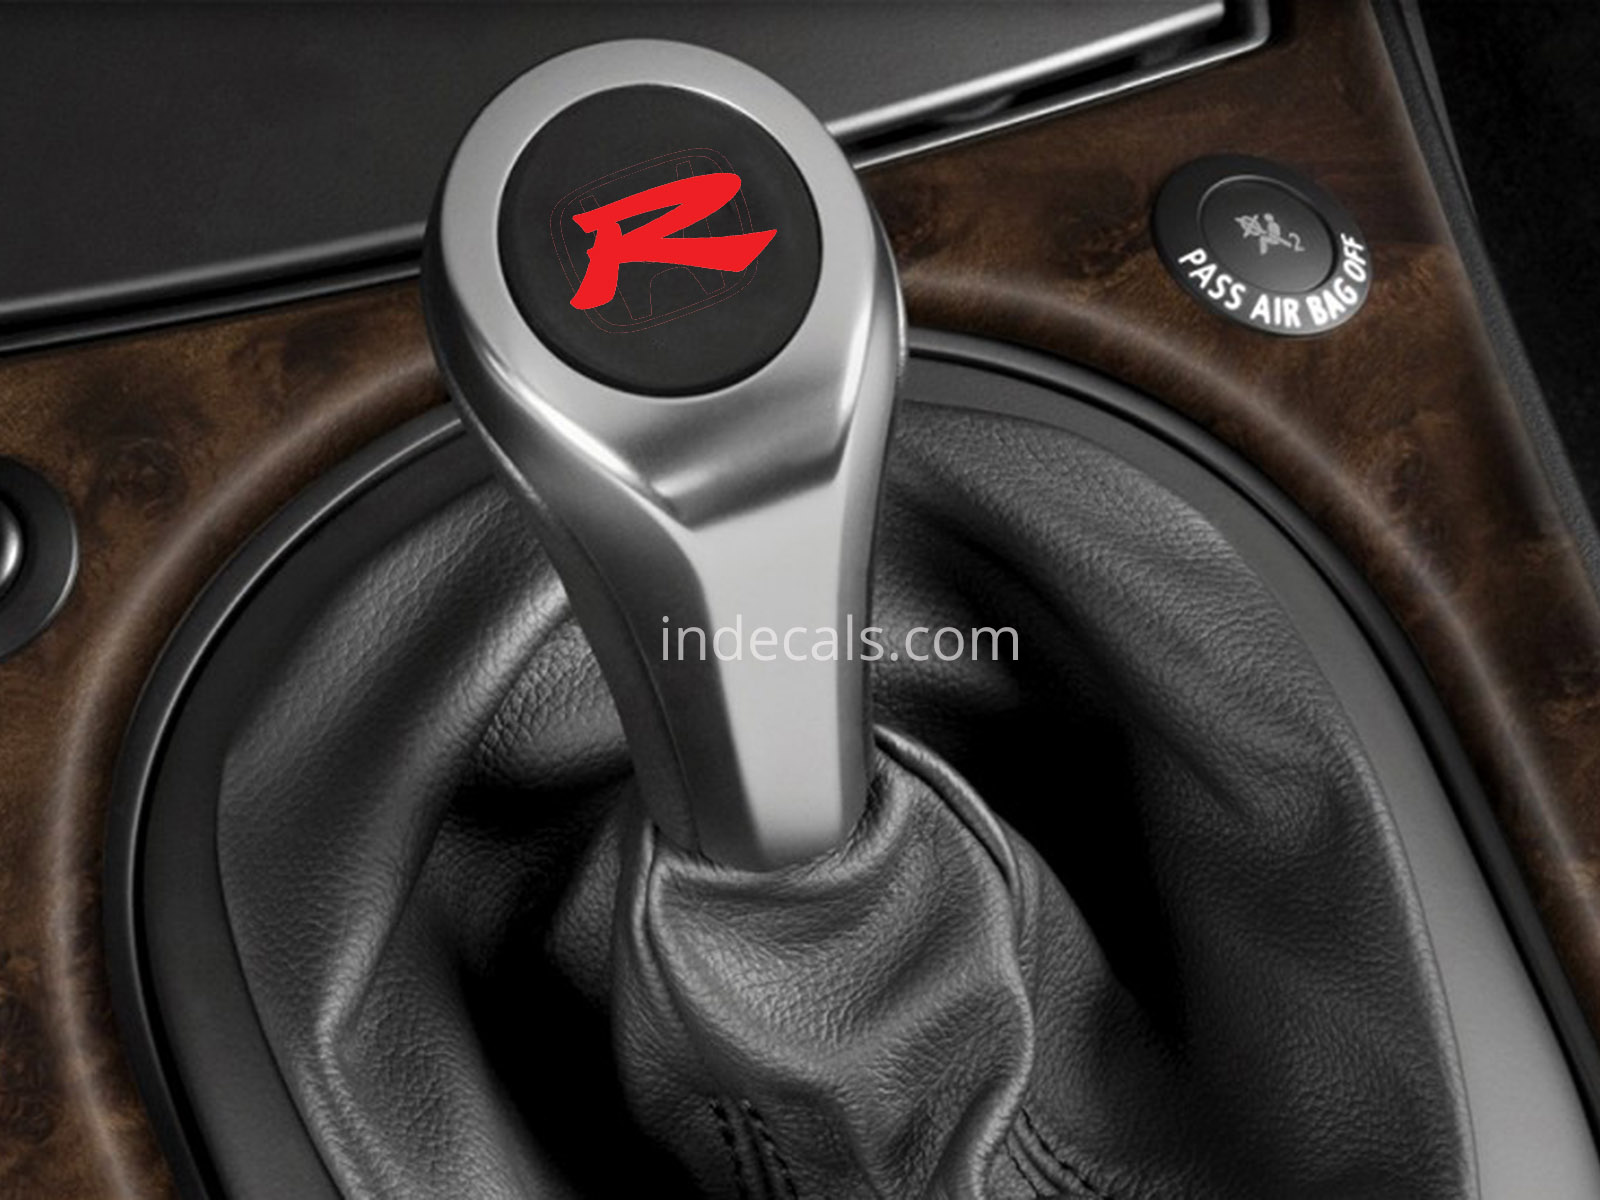 3 x Honda Type R Stickers for Gear Knob - Red